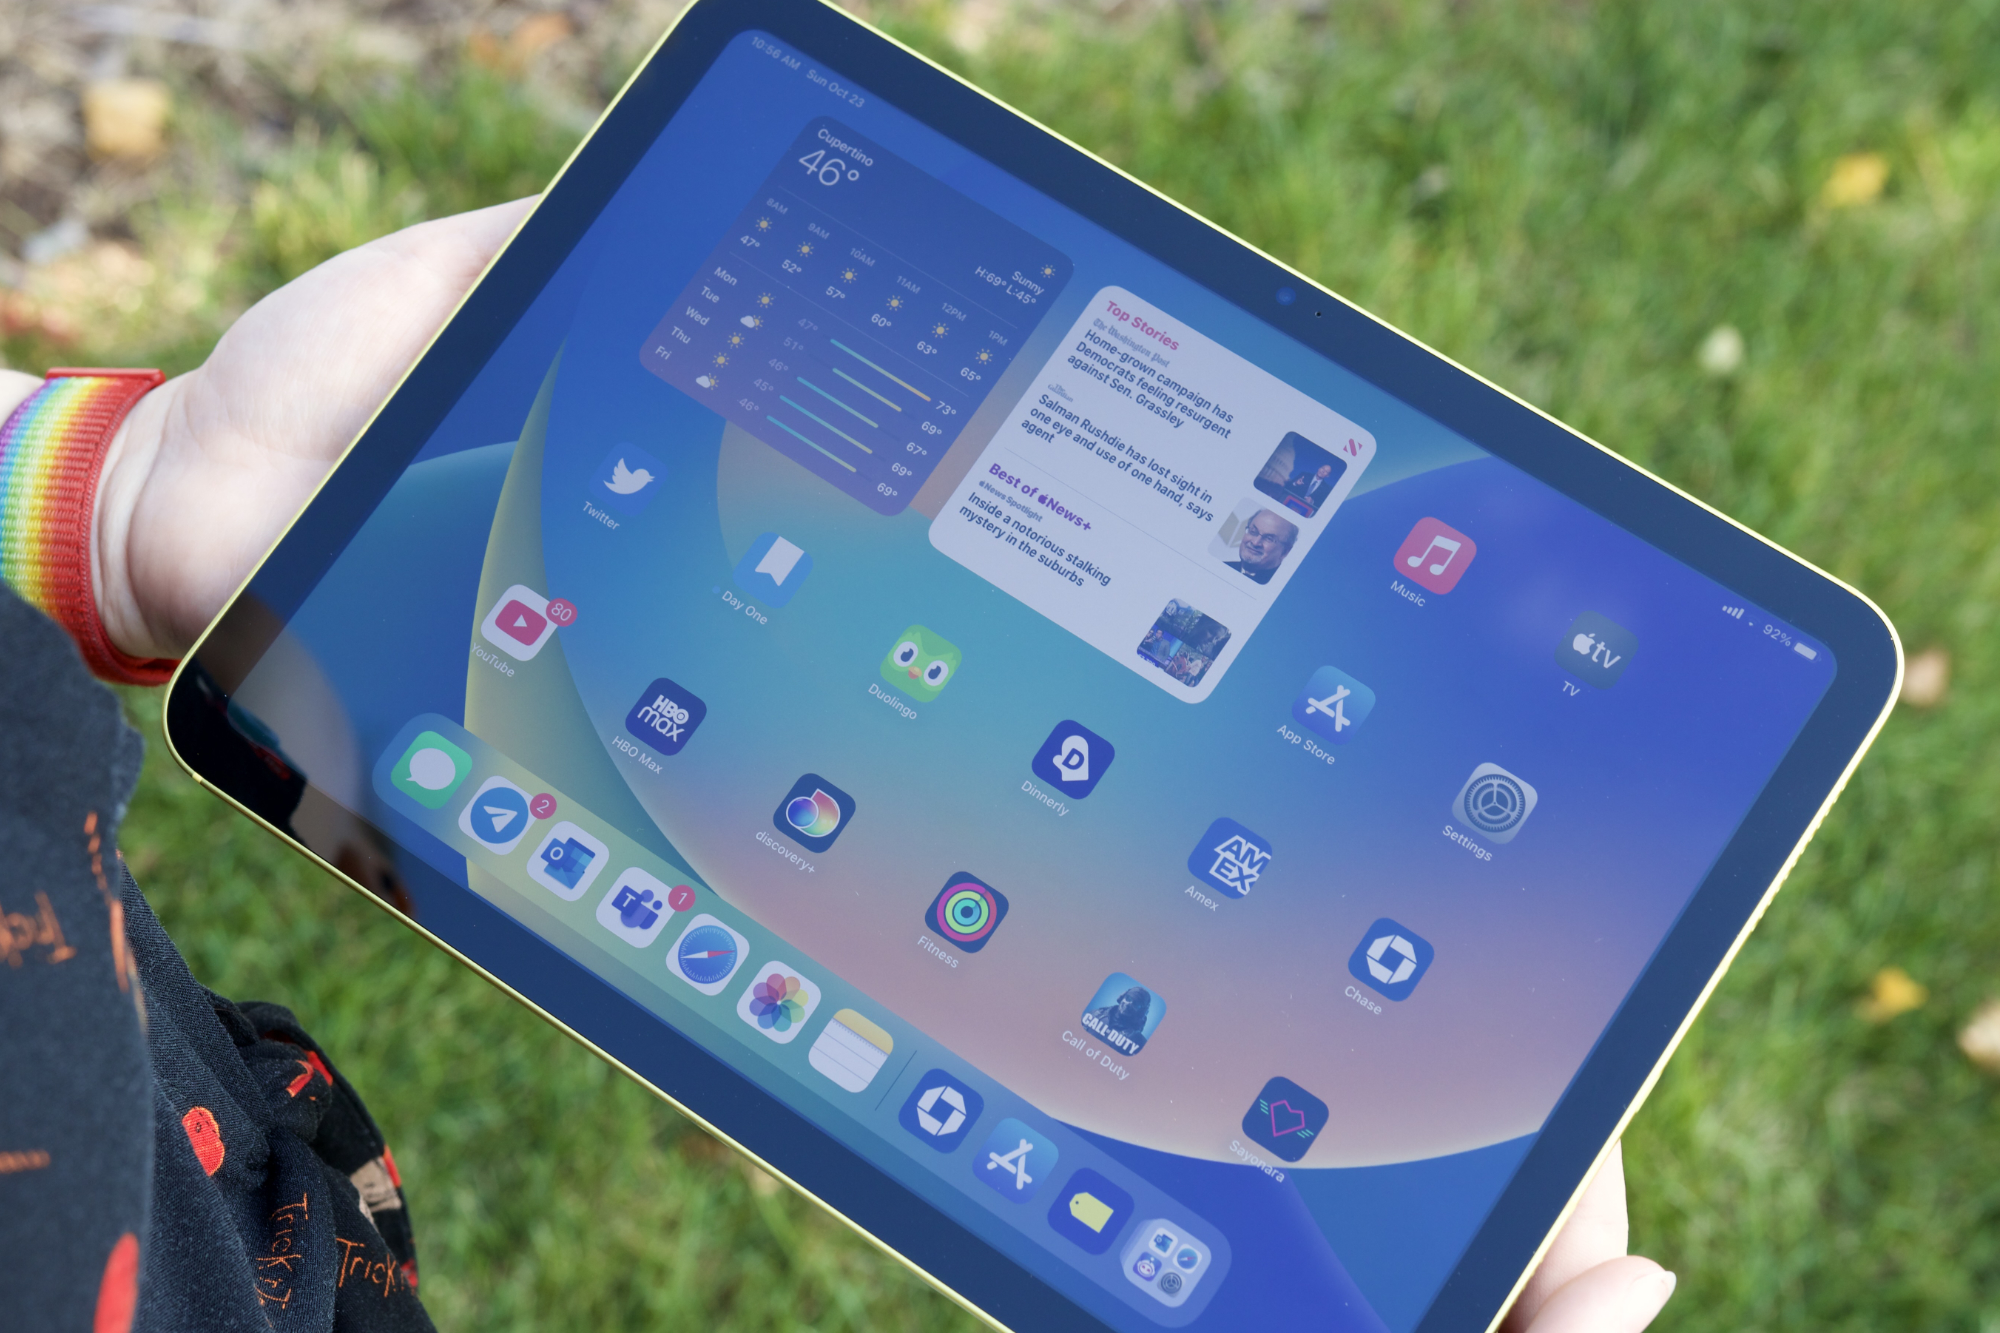 iPad 10.9 (2022) review: The entry-level iPad is all grown up